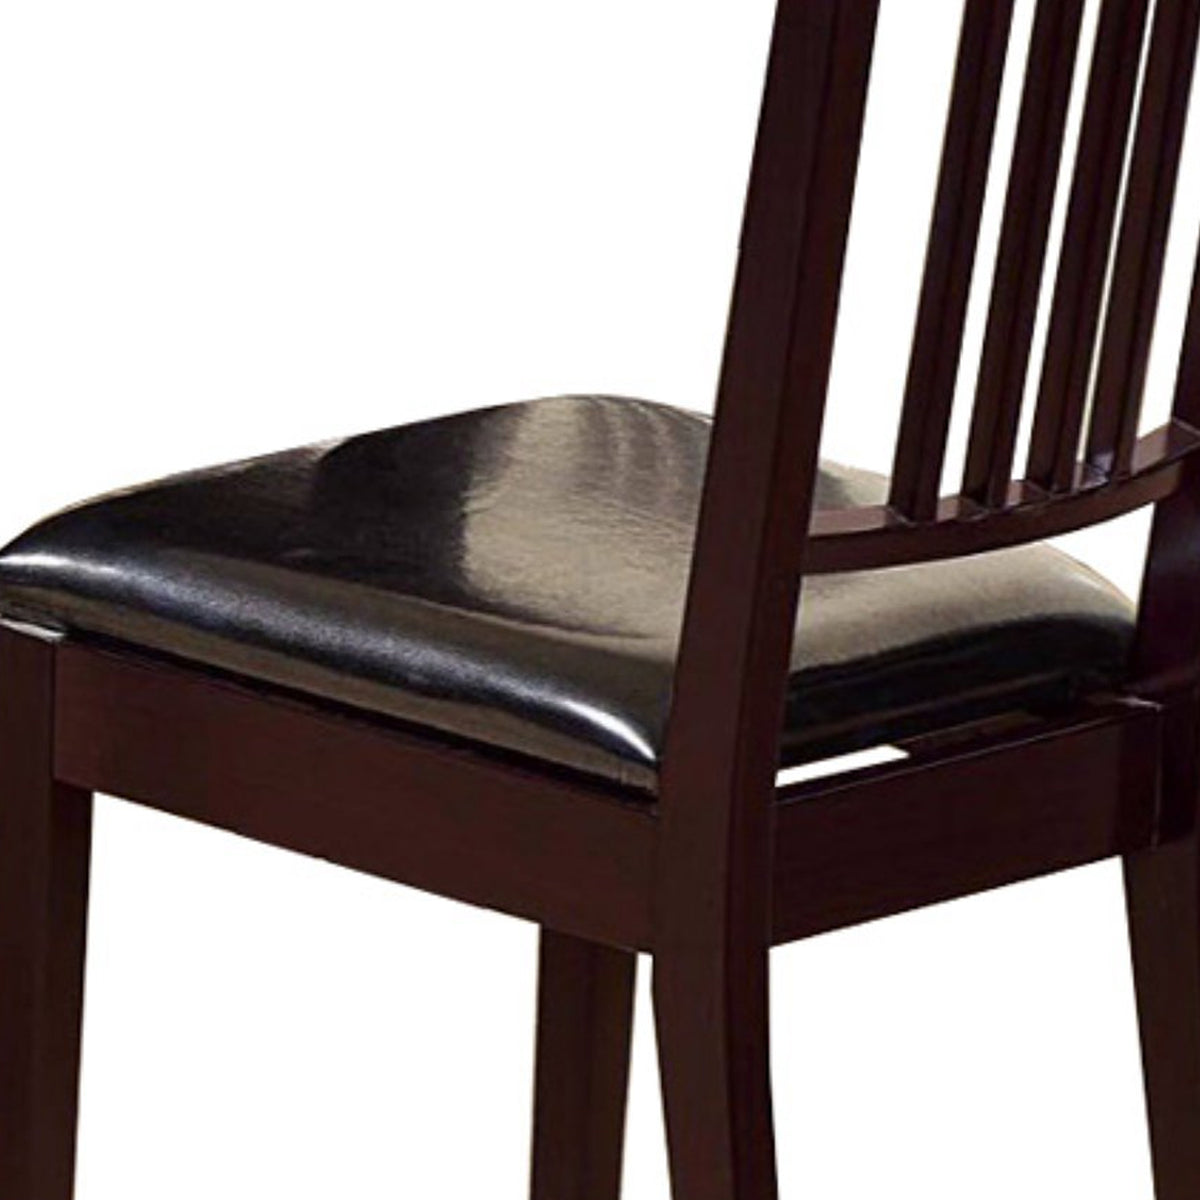 Comfortable Dining Chair With Lustrous Finish Seat, Set of Two, Dark Brown - BM148909